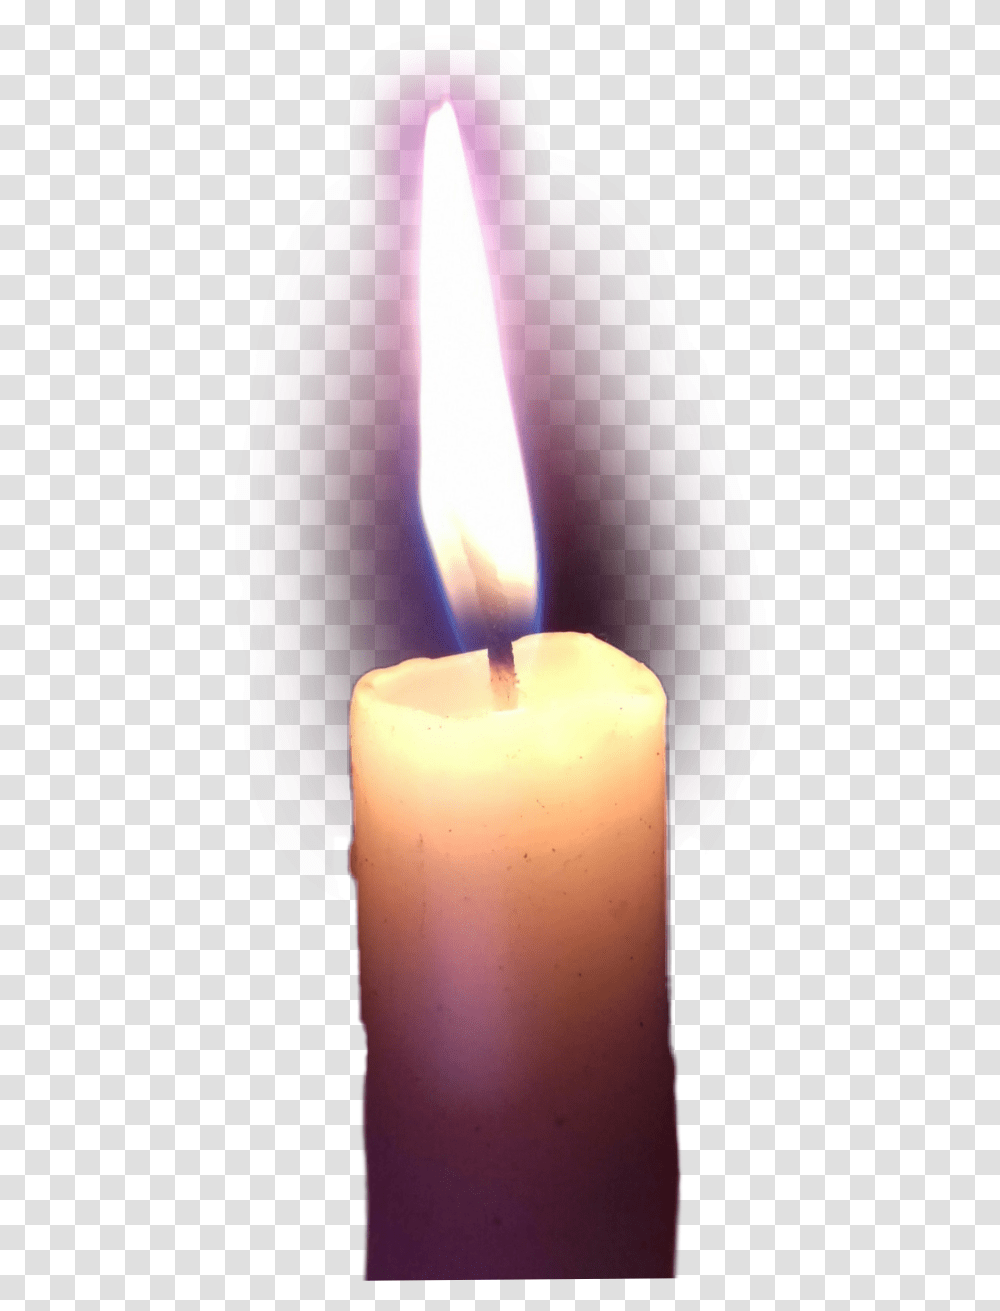 Candle Flame Lit Dark Light Made From The Artist Of Lit Candle, Fire Transparent Png